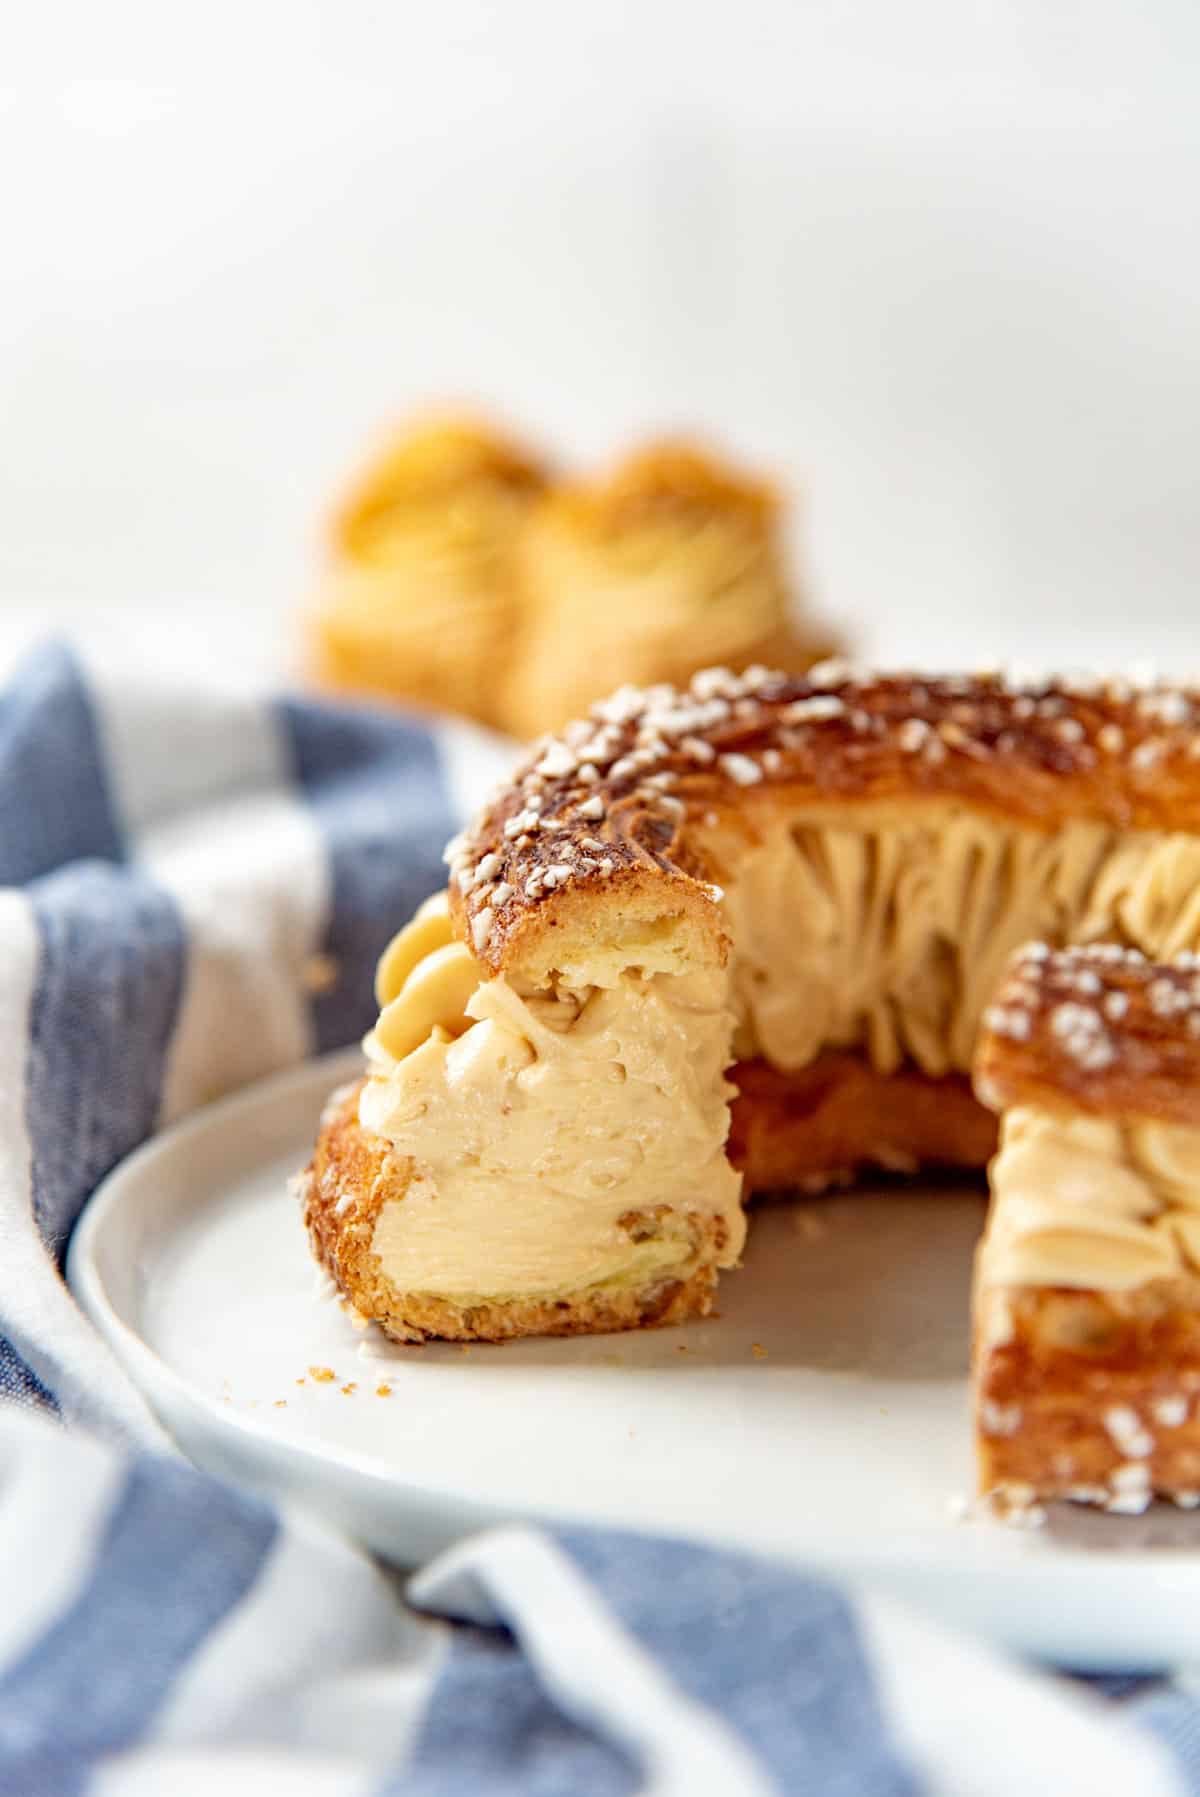 A cross section of a Paris Brest pastry, showing the choux pastry and the praline mousseline cream filling.